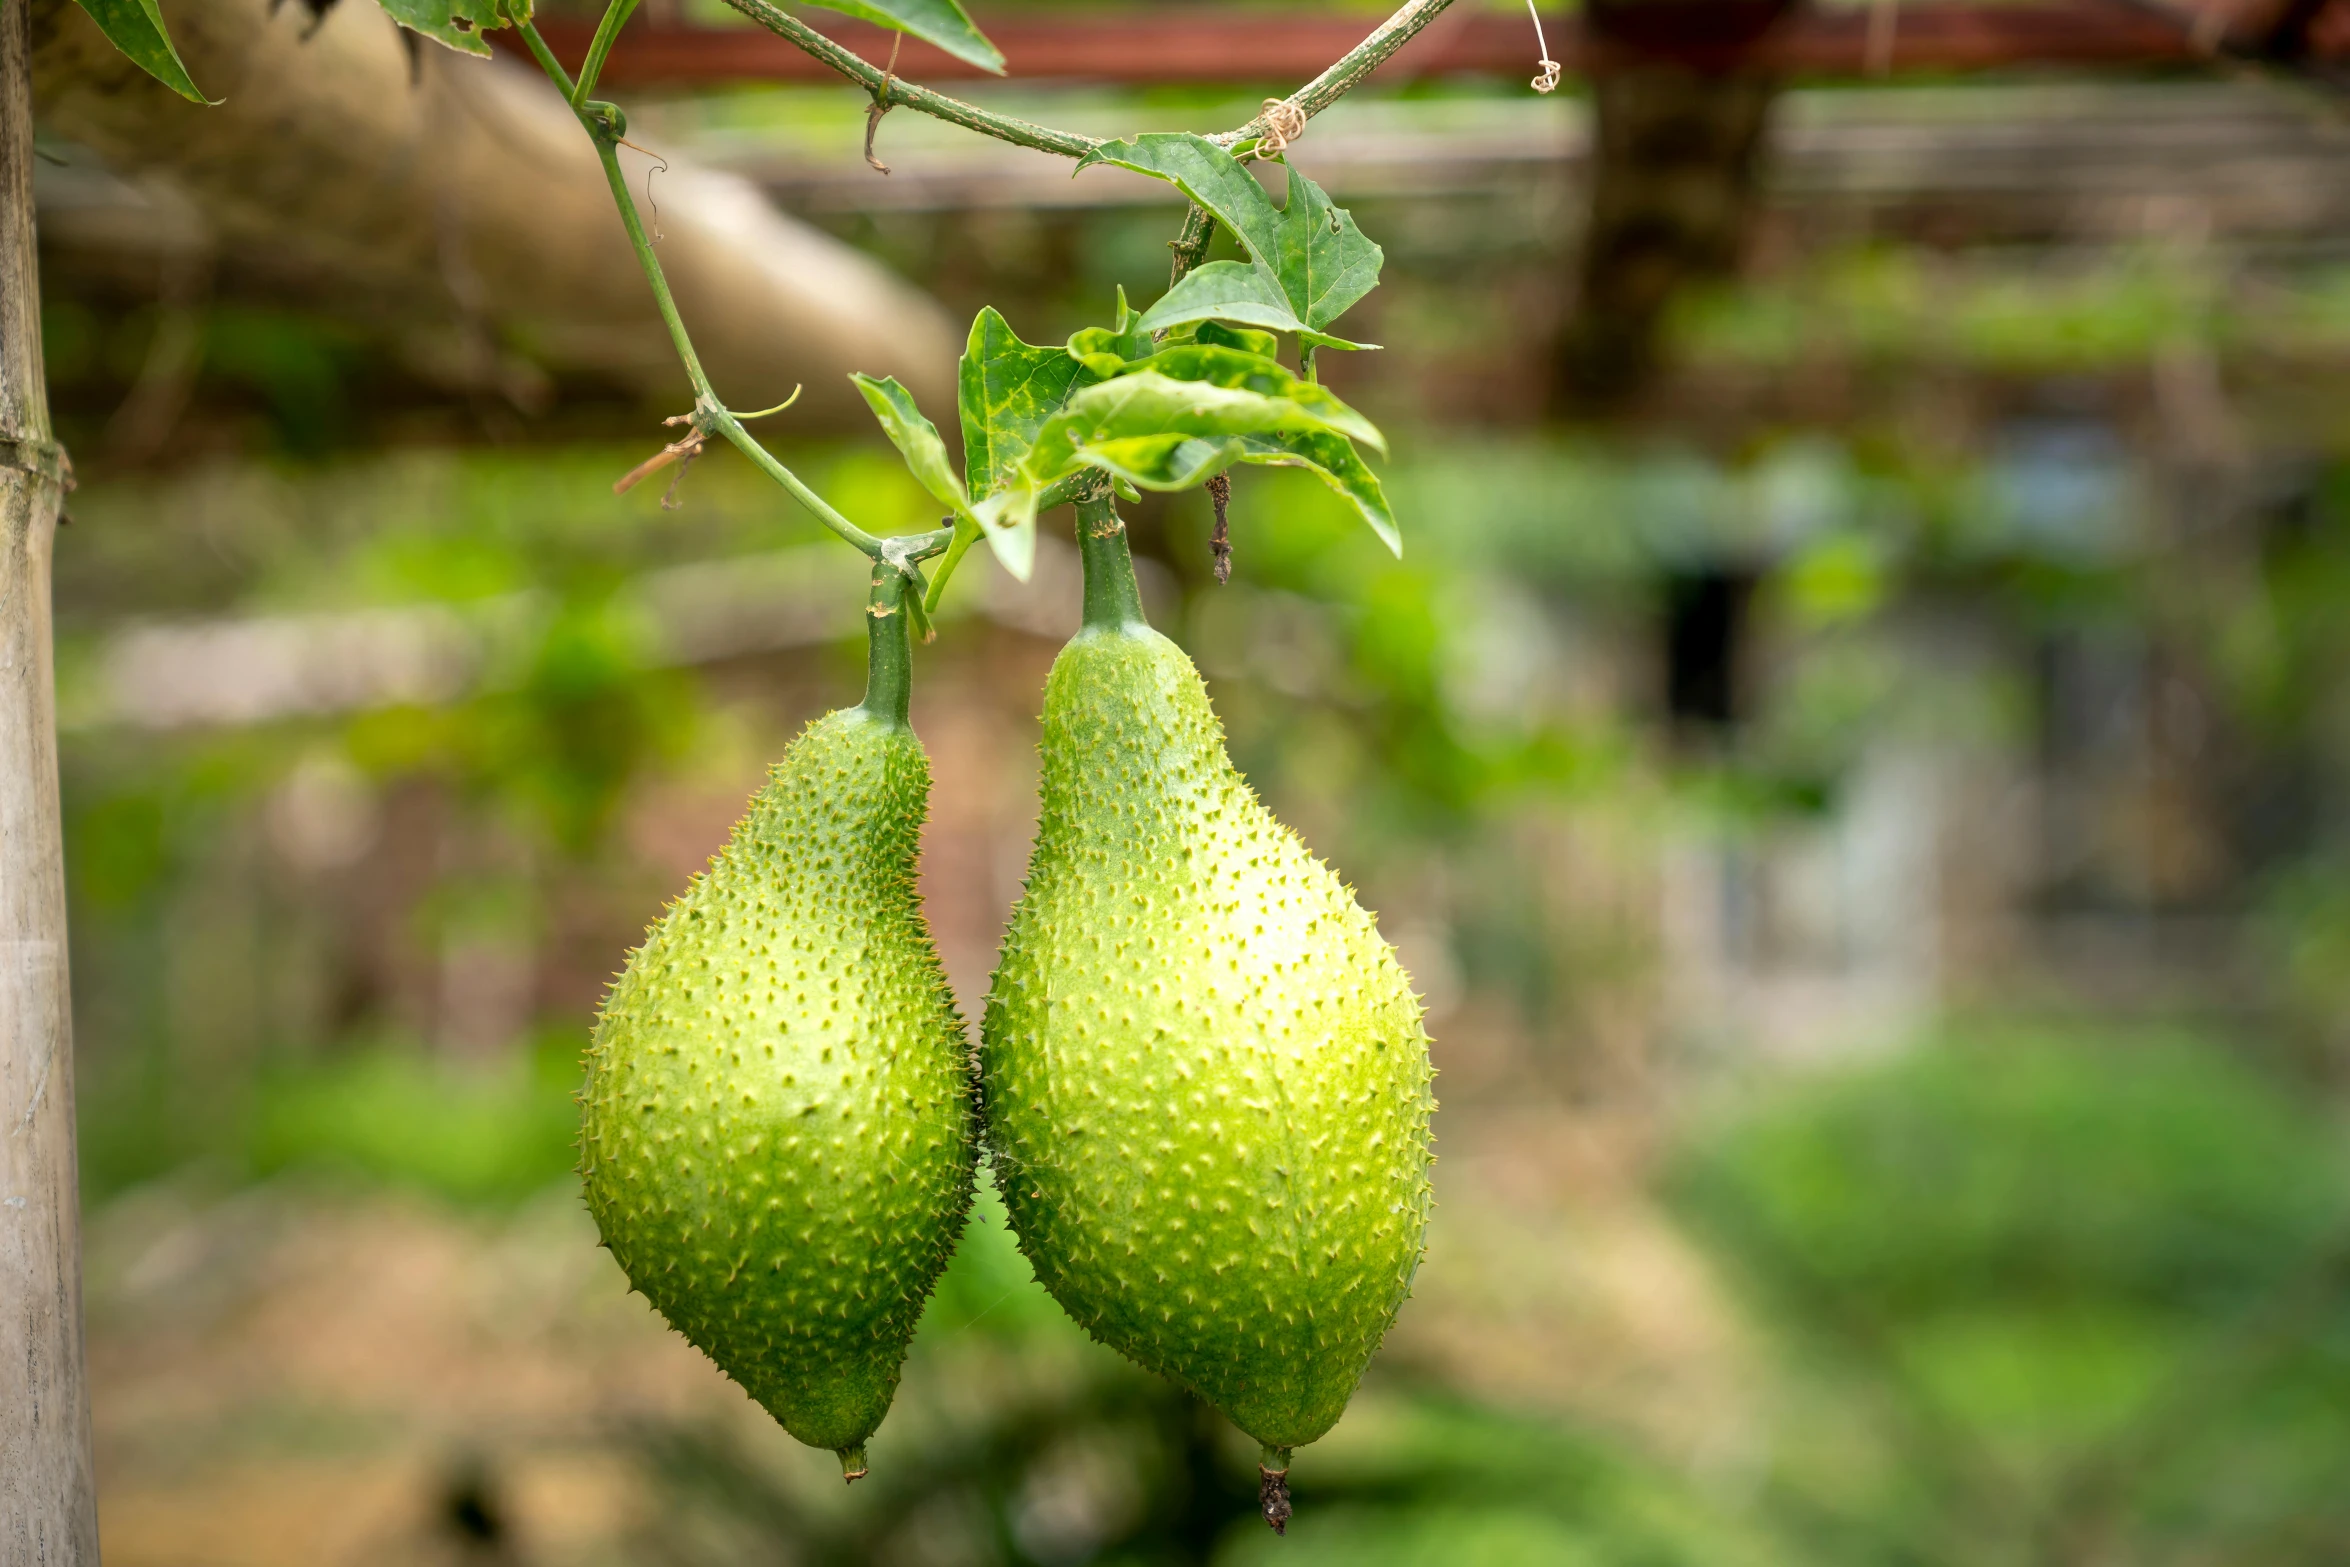 a couple of green fruit hanging from a tree, hydroponic farms, avatar image, shot on sony a 7, uncropped